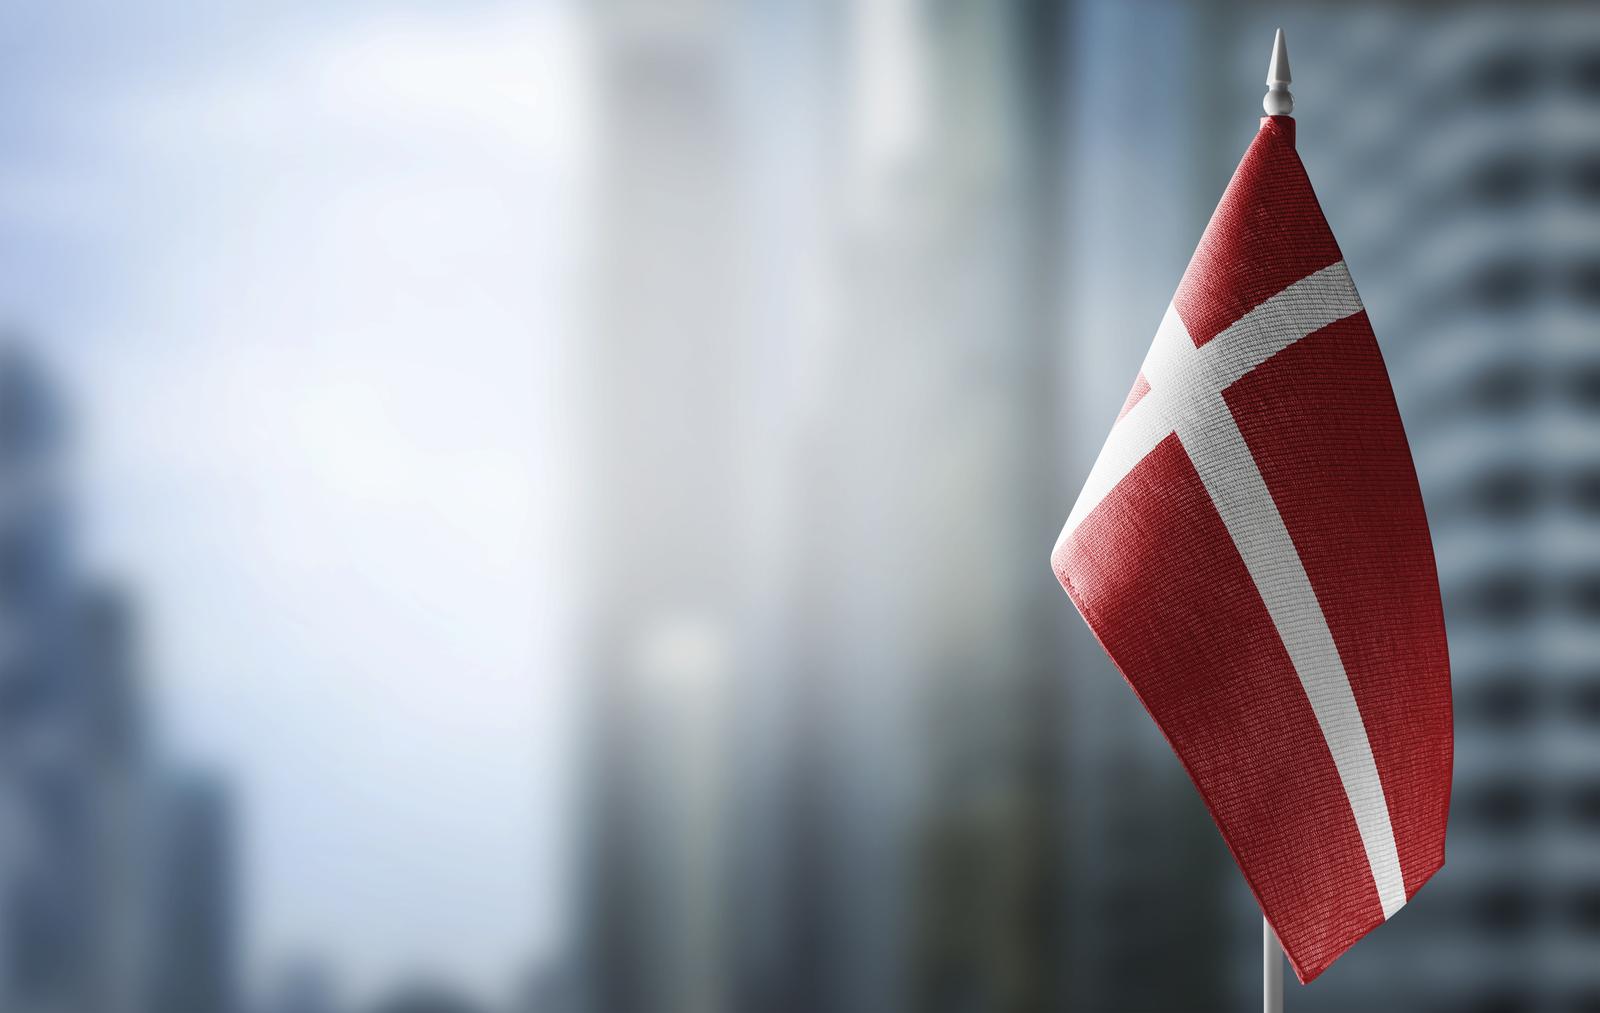 Annual settlement of a company in Denmark – deadline and documents